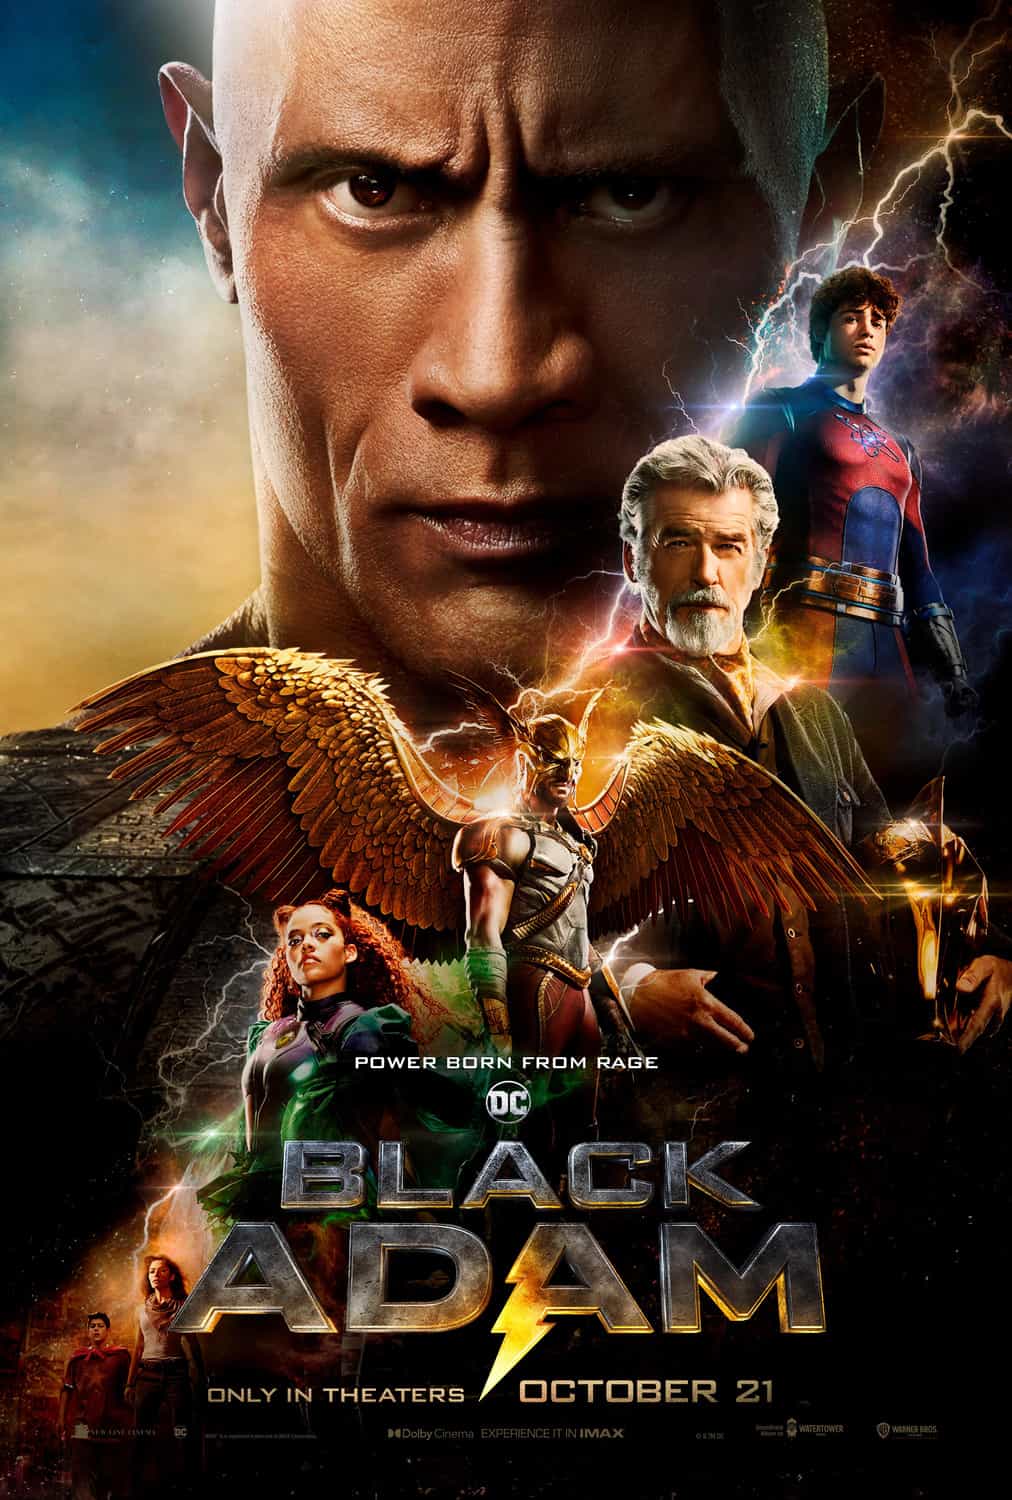 UK Box Office Weekend Report 21st - 23rd October 2022: Black Adam tops the UK box office on its debut weekend with over £5.5 Million